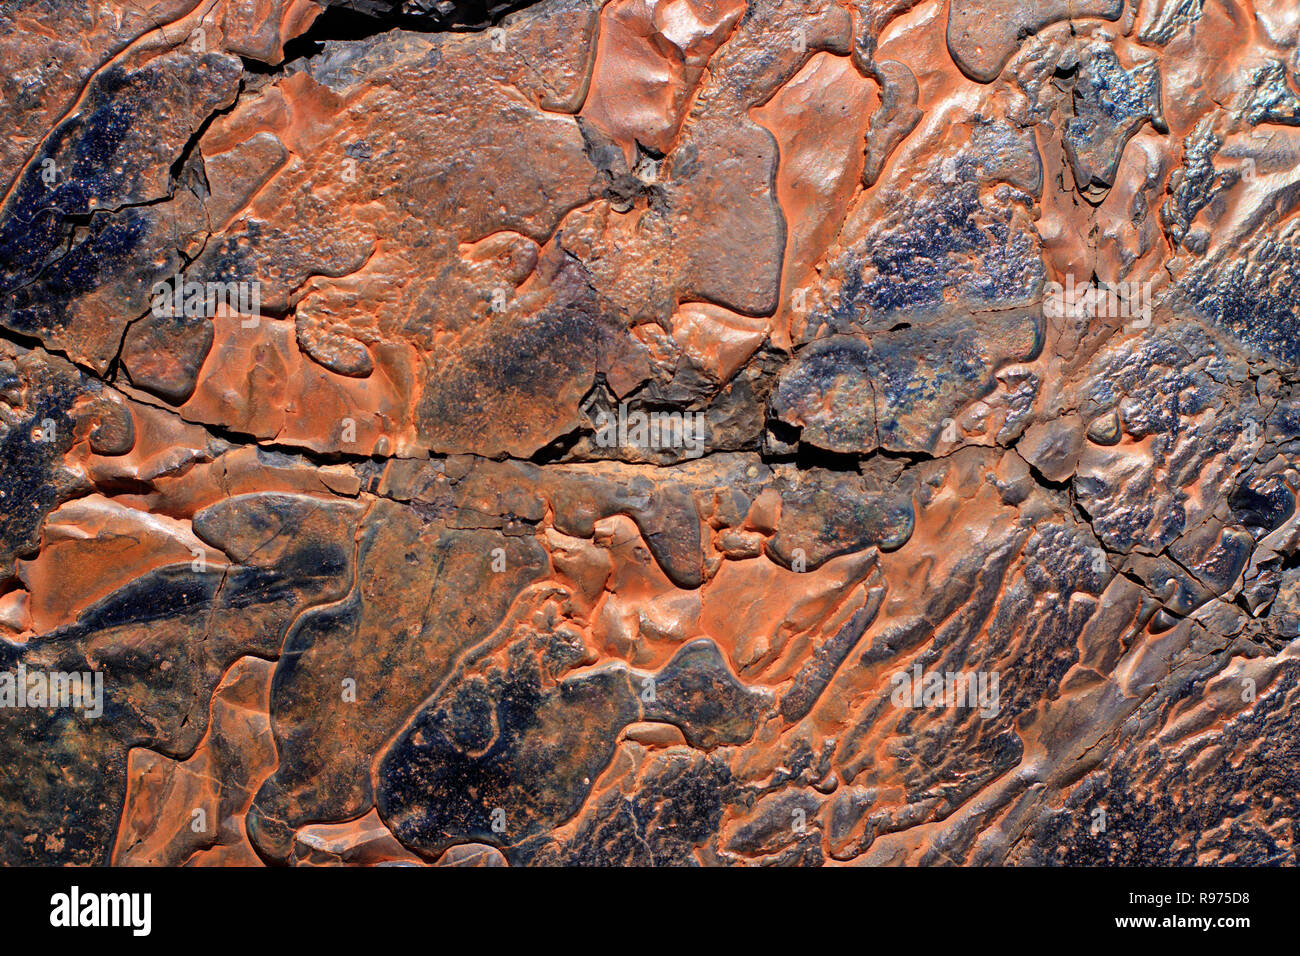 Abstract design of the side of a copper smelter slag heap showing once molten ore background with copy space Stock Photo